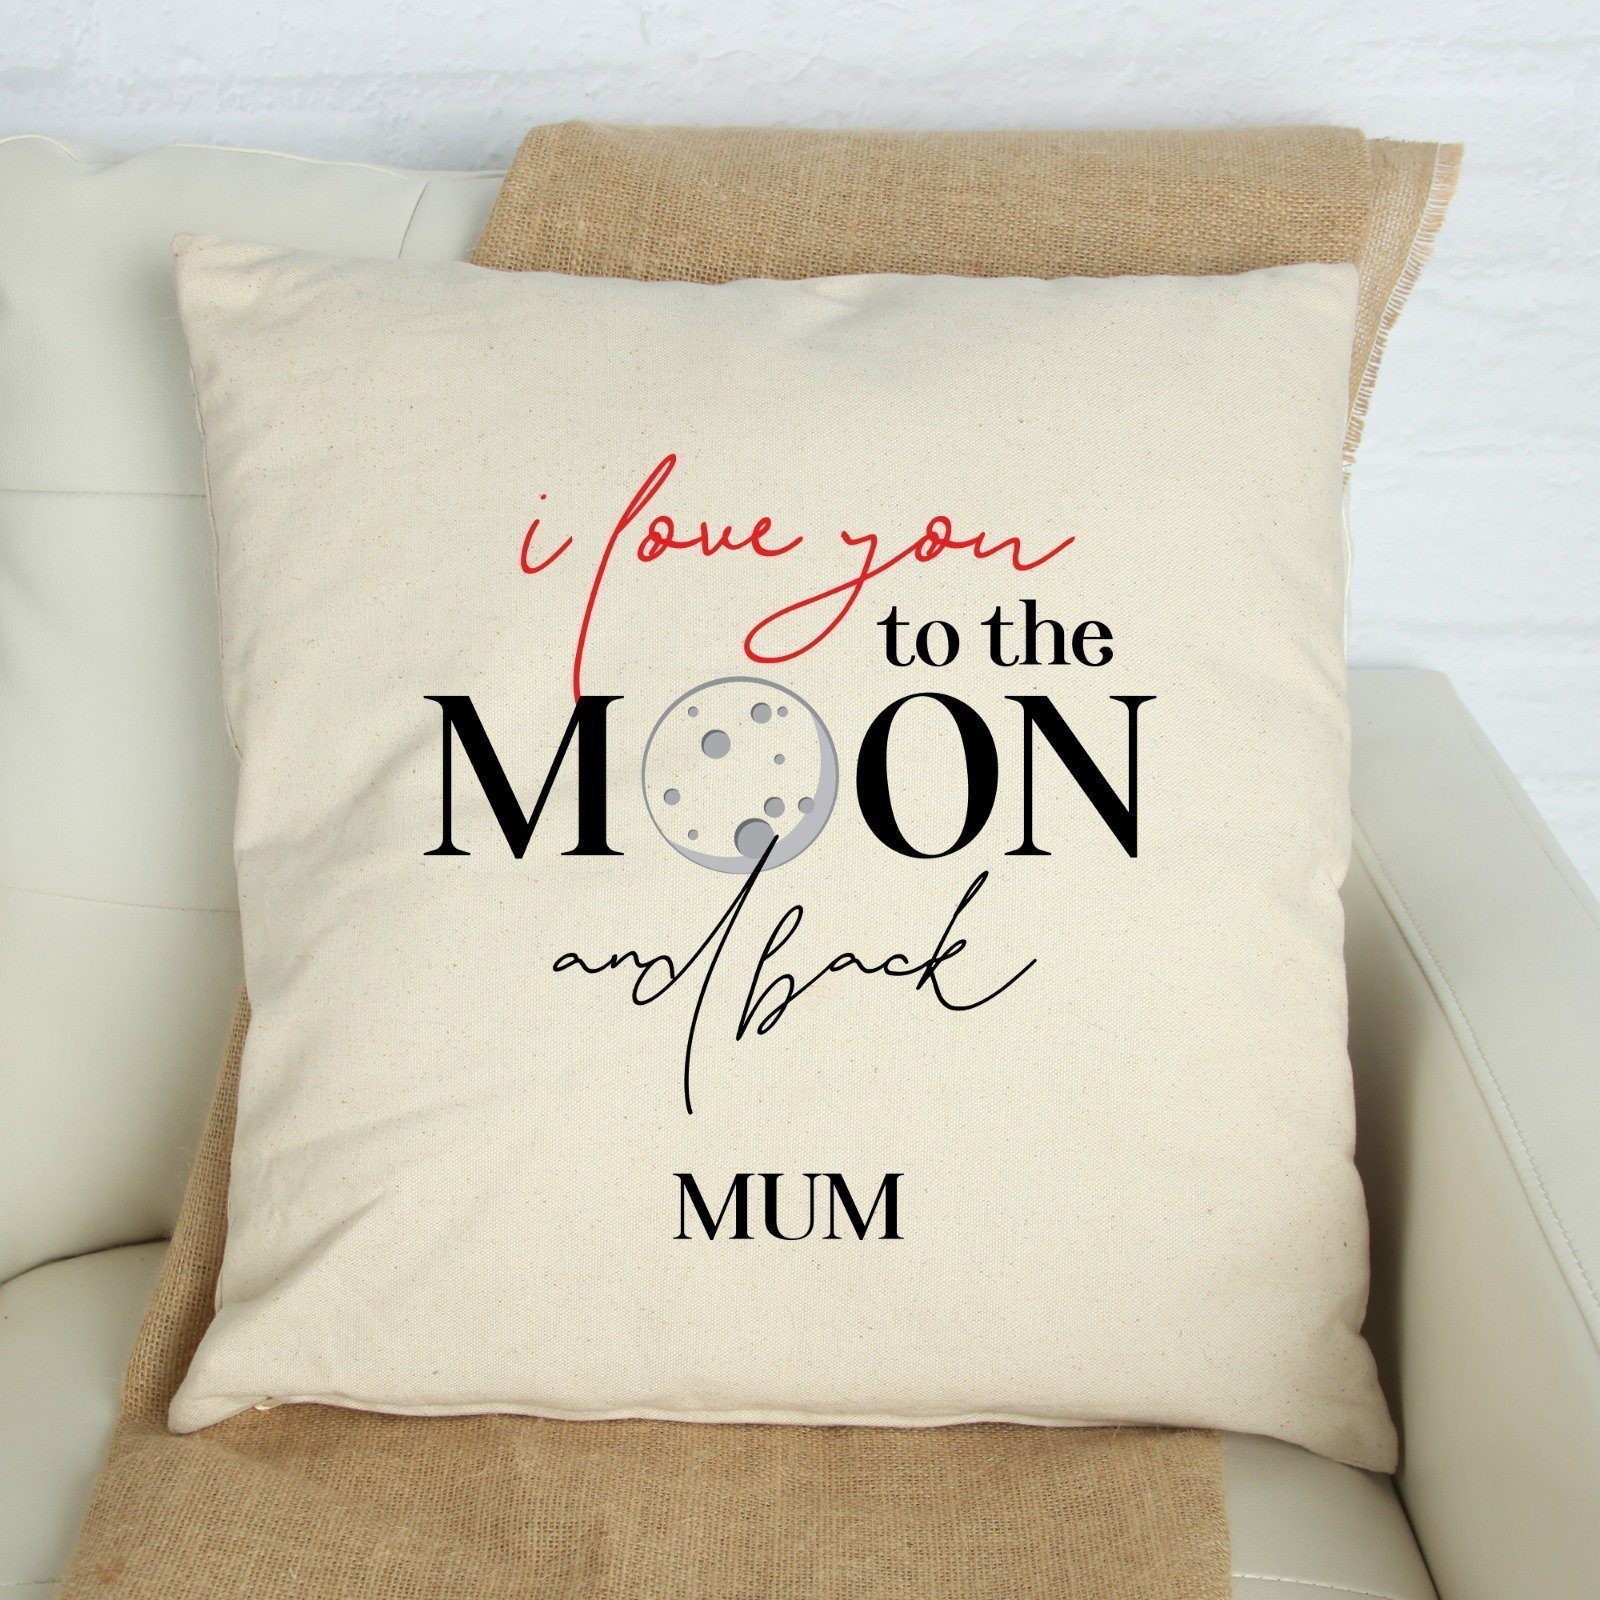 I love you to the moon and back mum cushion cover, Mother's Day Gift with heart, Square Pillow Cover